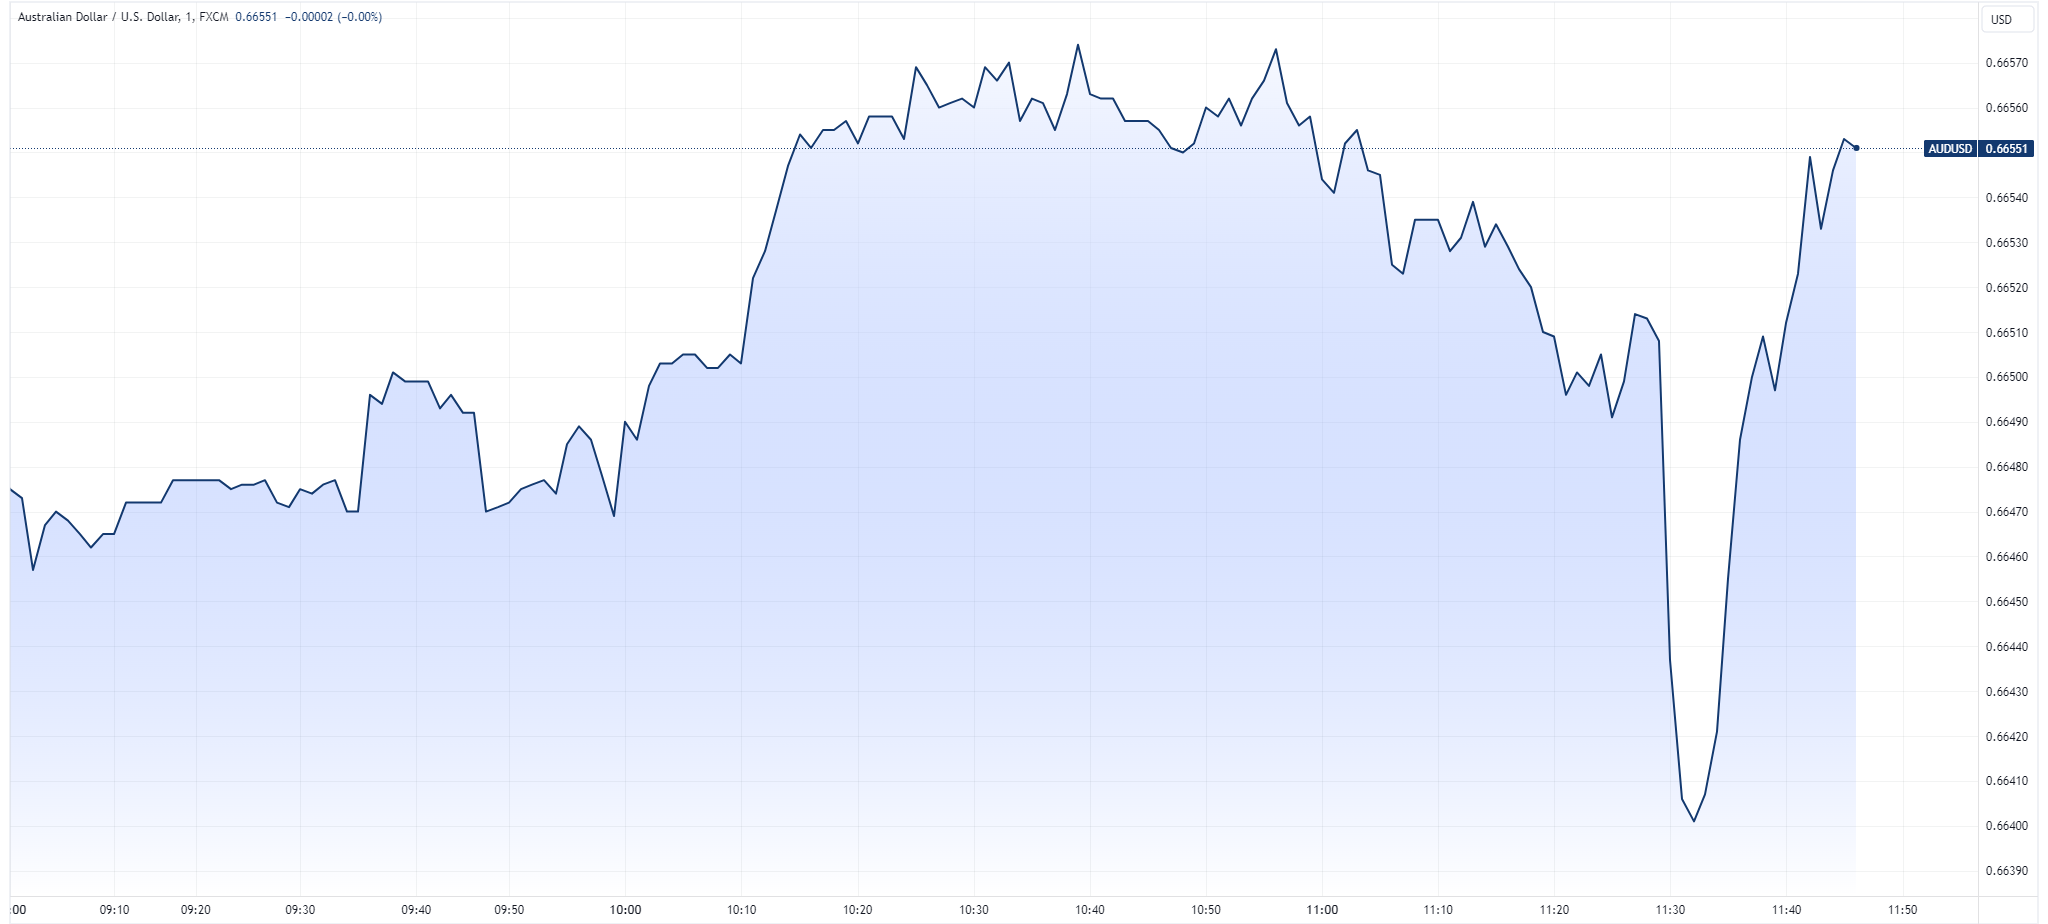 The Australian Dollar catches a bid following the inflation print. (Source: TradingView)